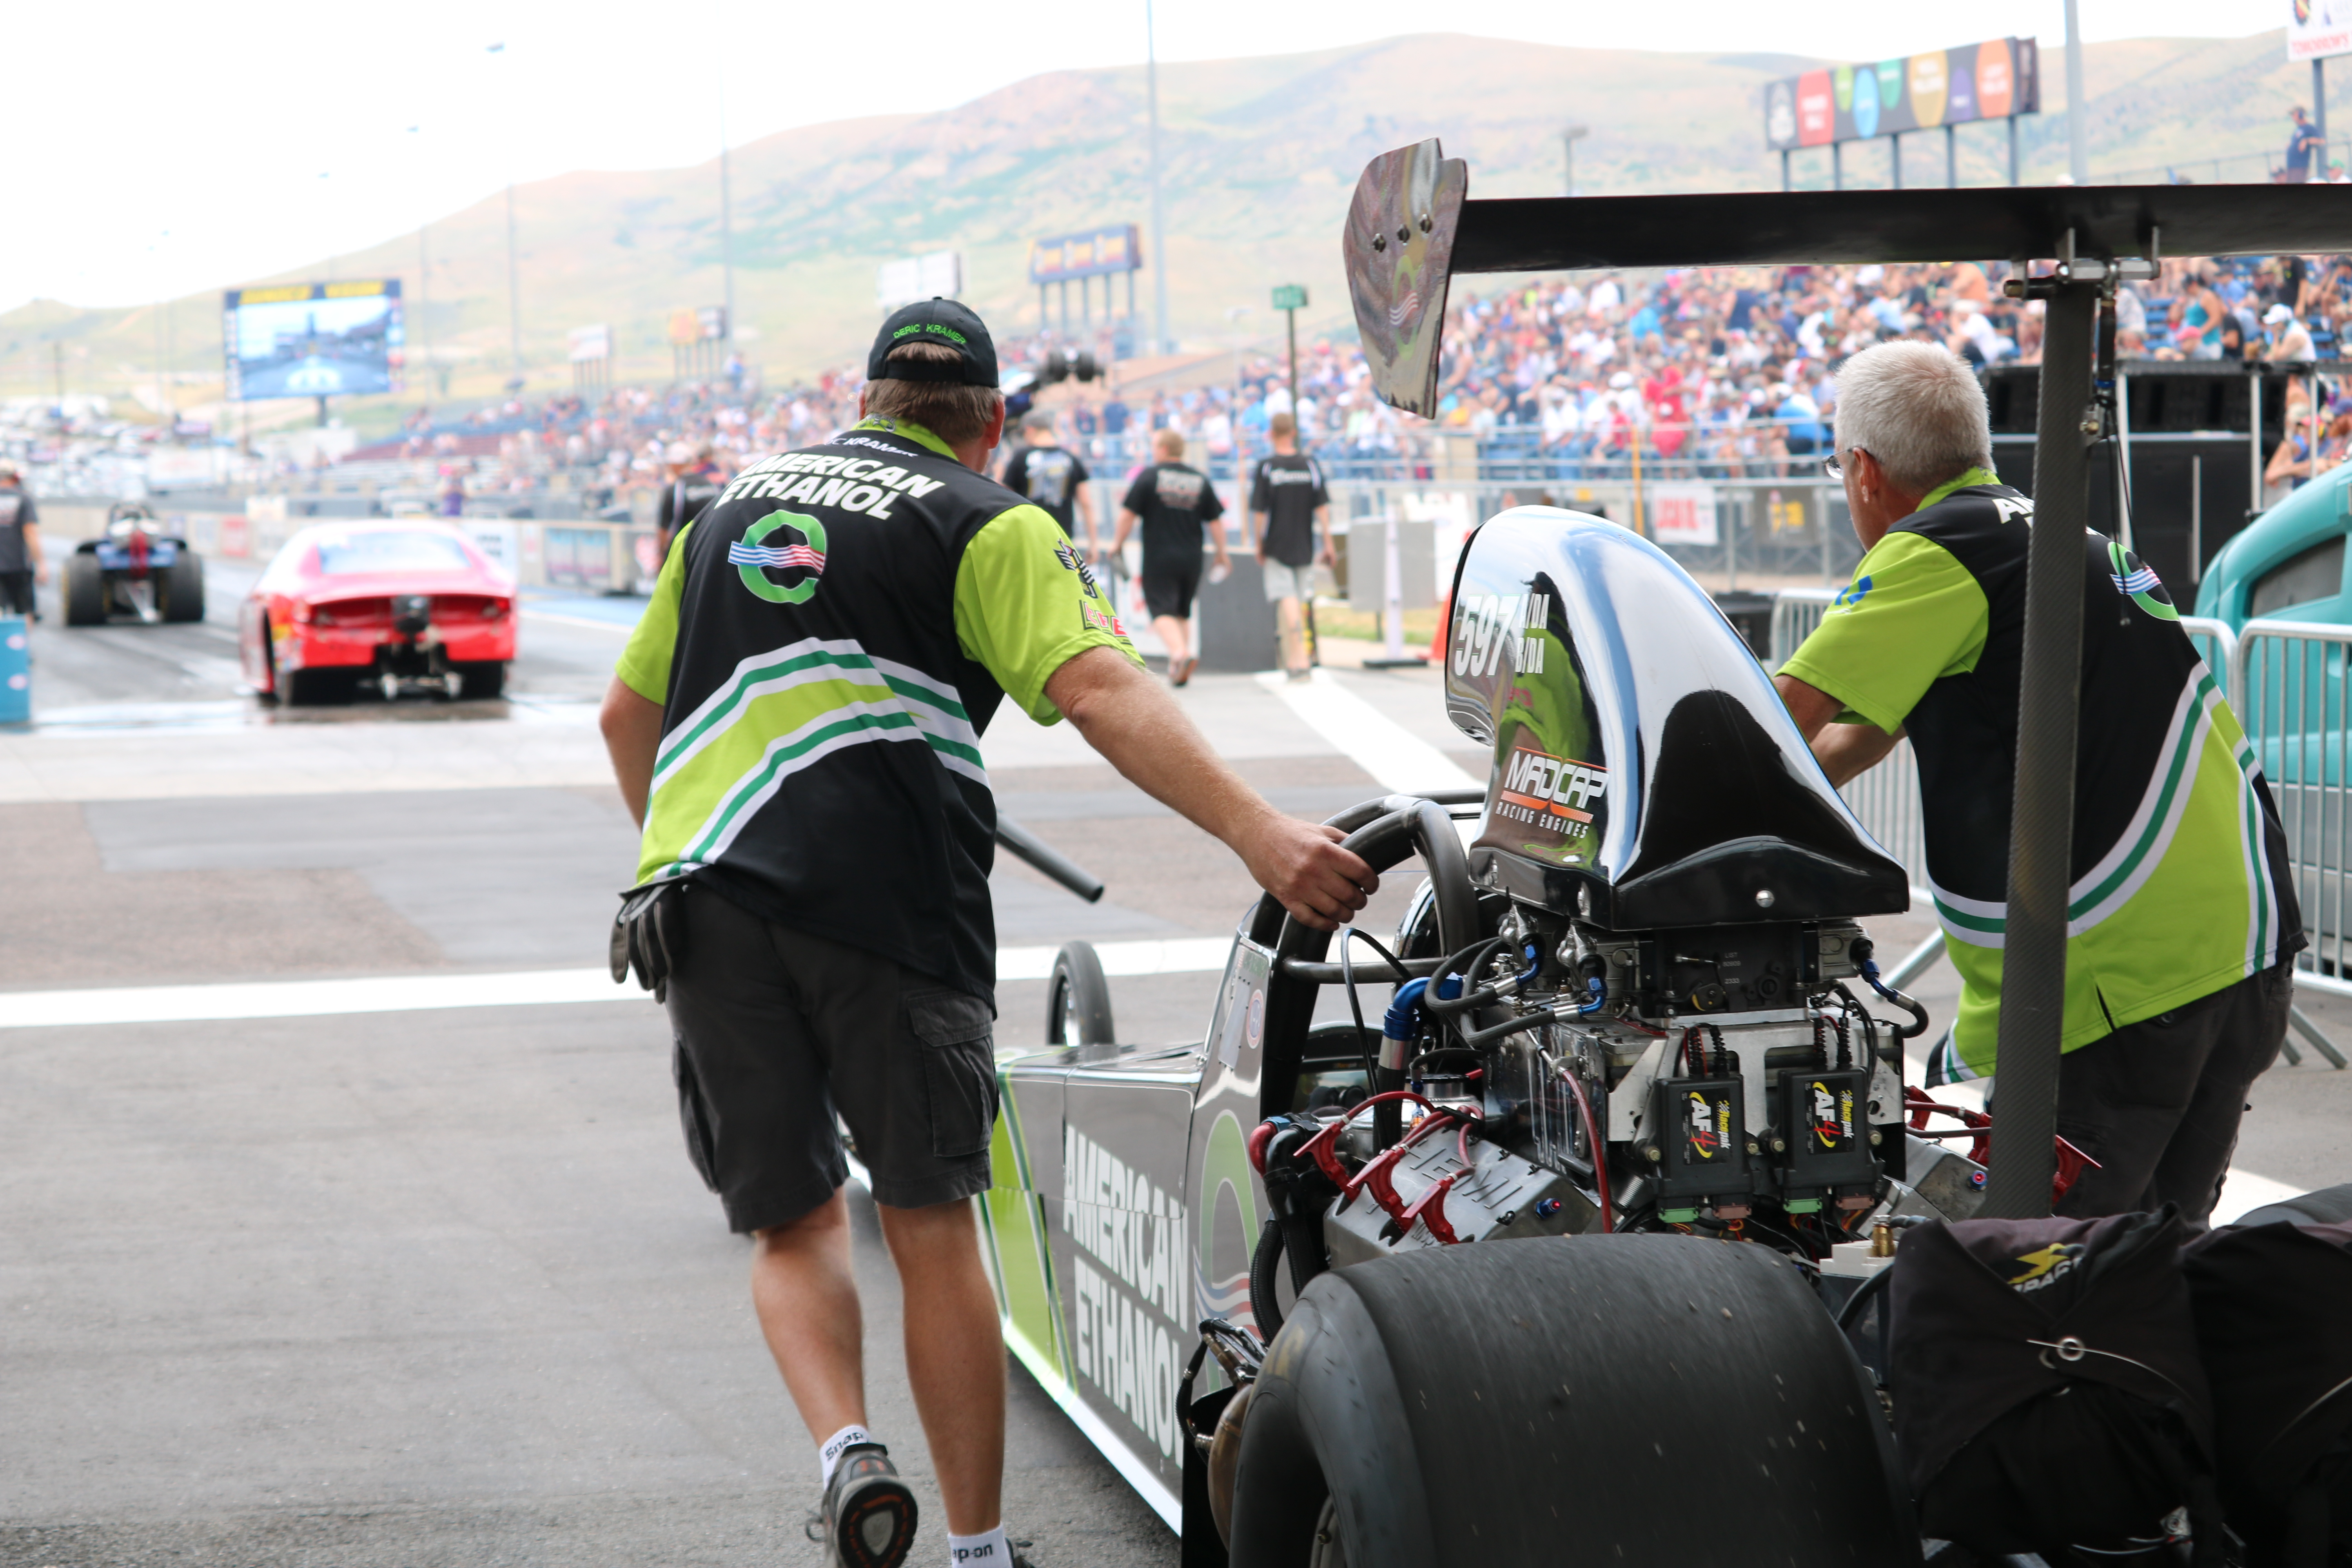 Spotlight on Sportsman Drag Racers From the Chevy World